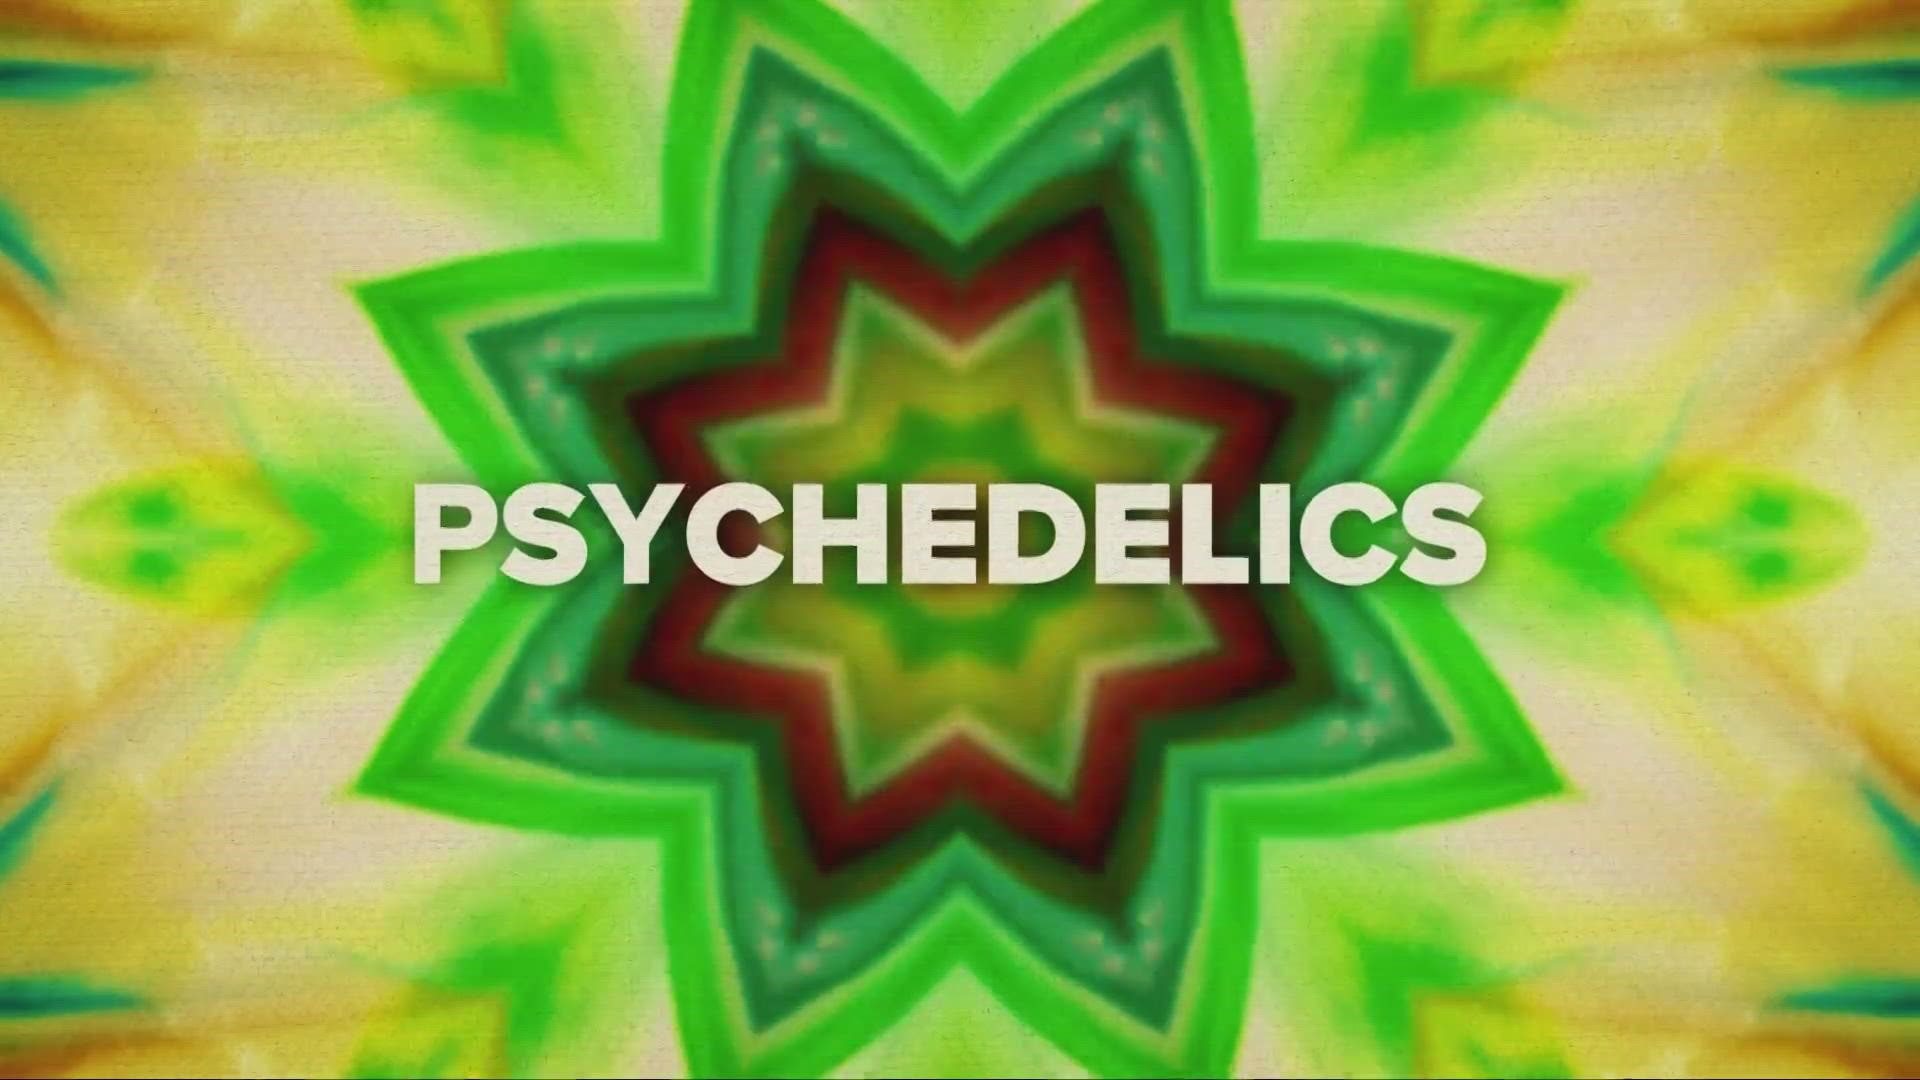 Cleveland Clinic and the Ohio State University have begun recruiting subjects to test whether LSD and psilocybin may help those with mental health disorders.